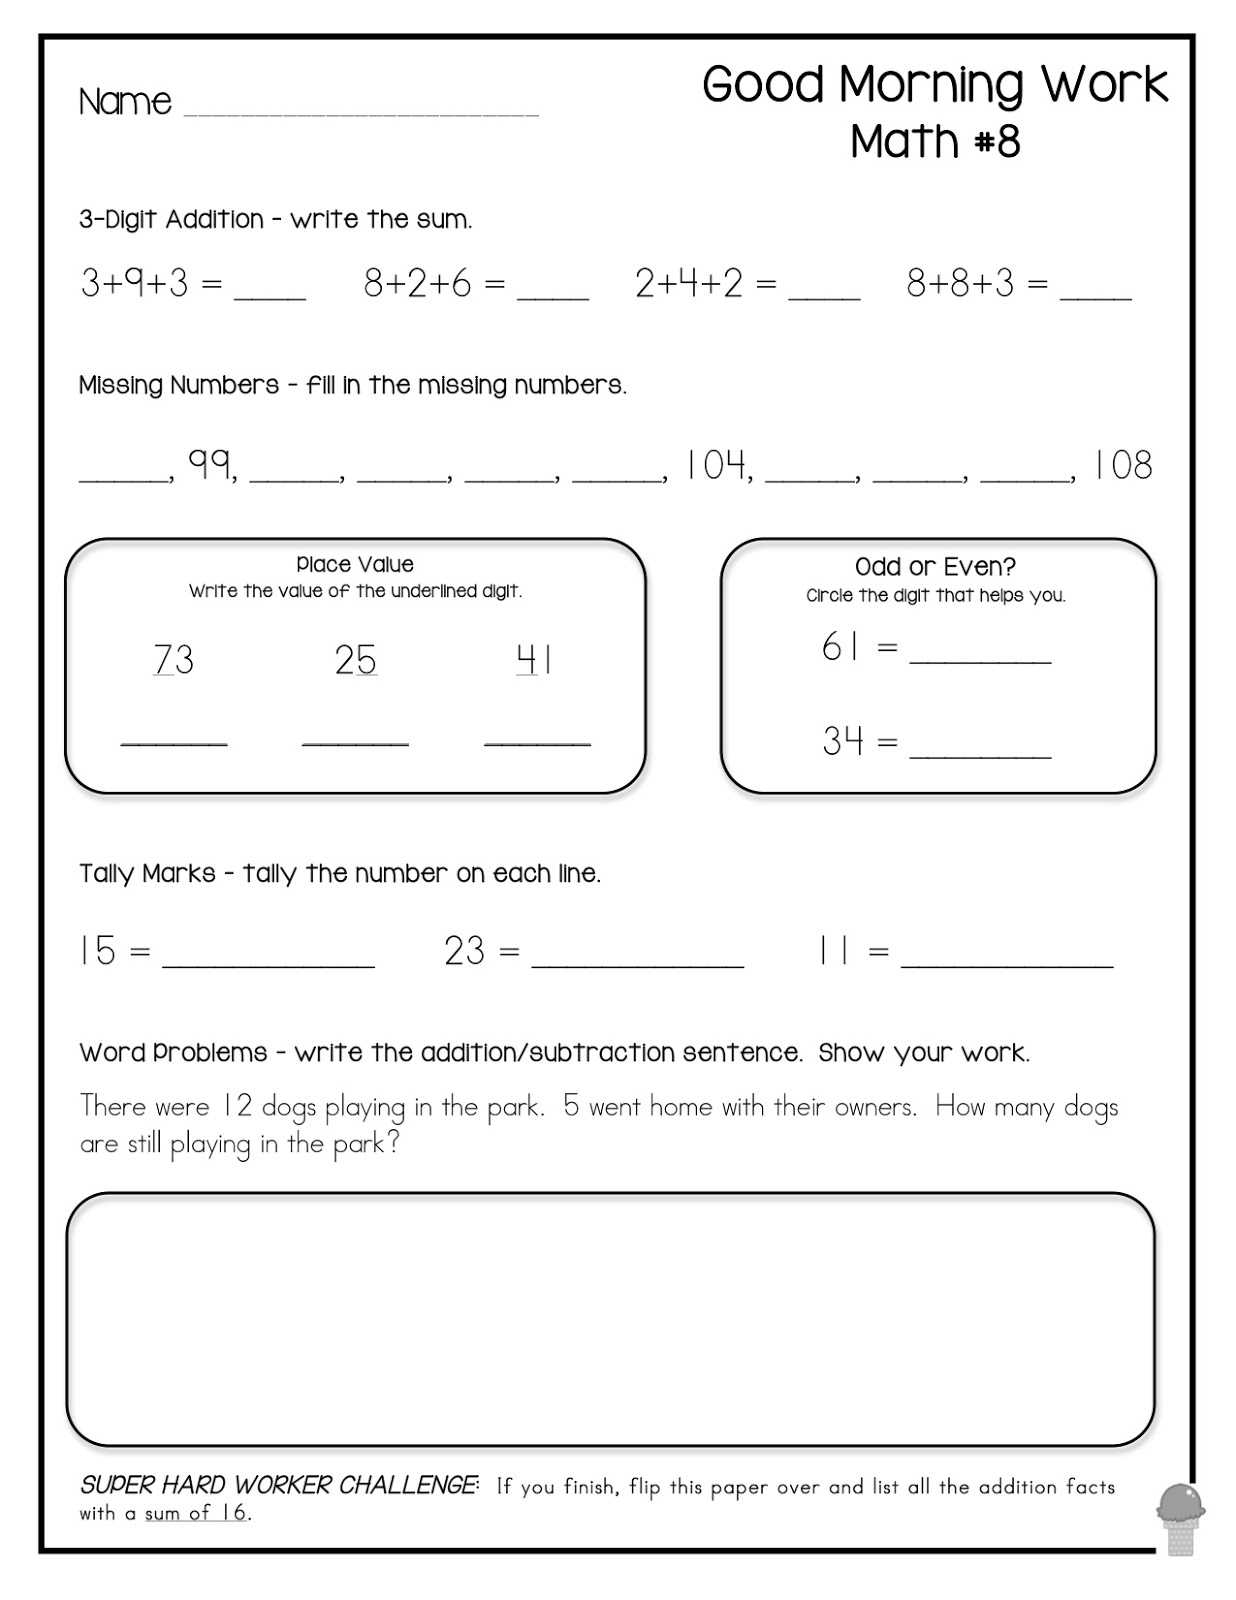 Esl Worksheets for Beginners Adults with Wonderful Printable Brain Teasers 17 for 4th Grade Unusual Free Math